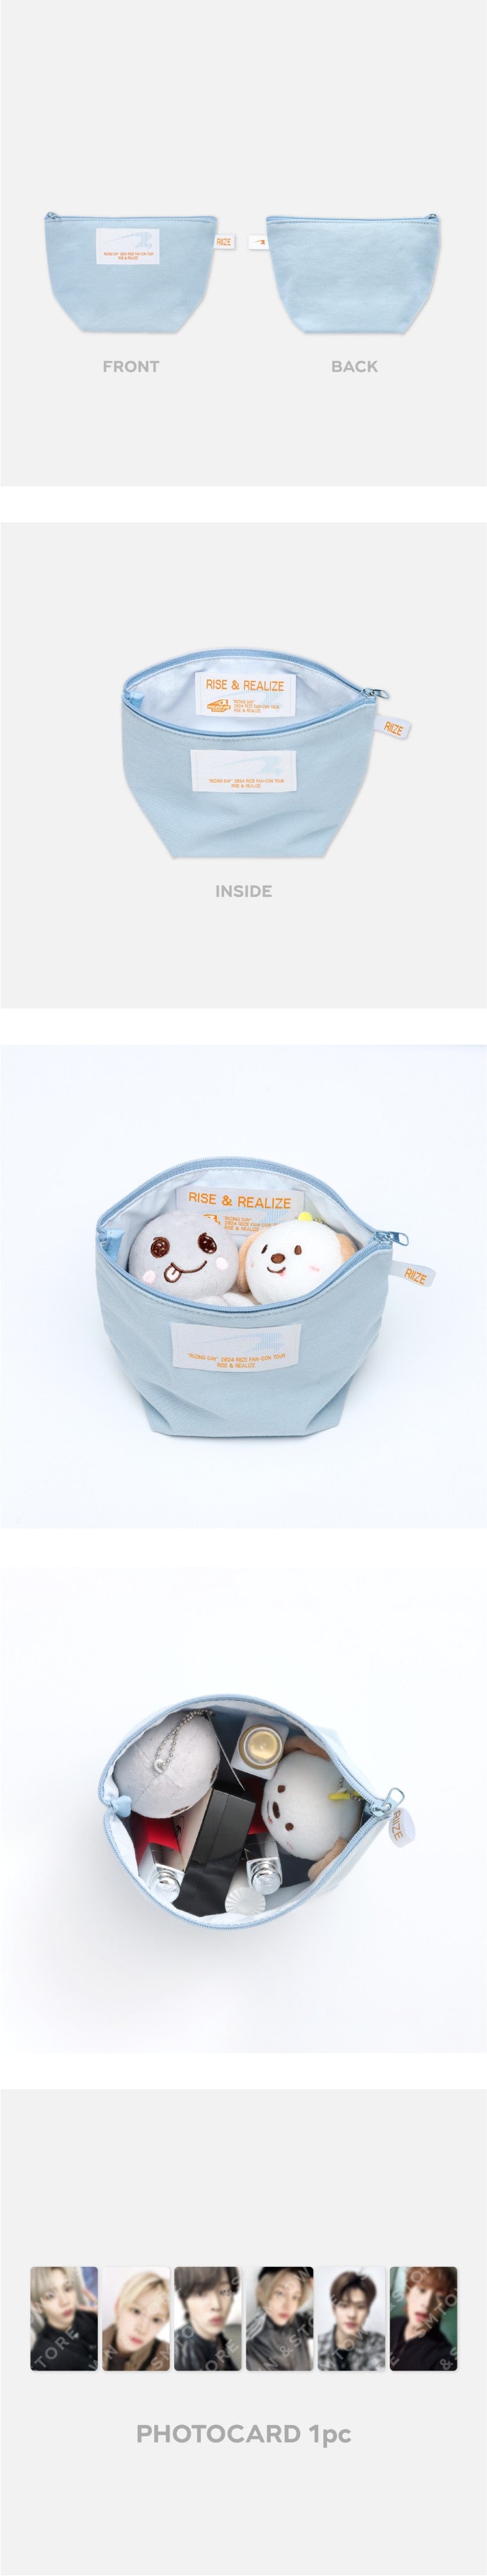 [PREORDER] RIIZE - RIIZING DAY POUCH SET